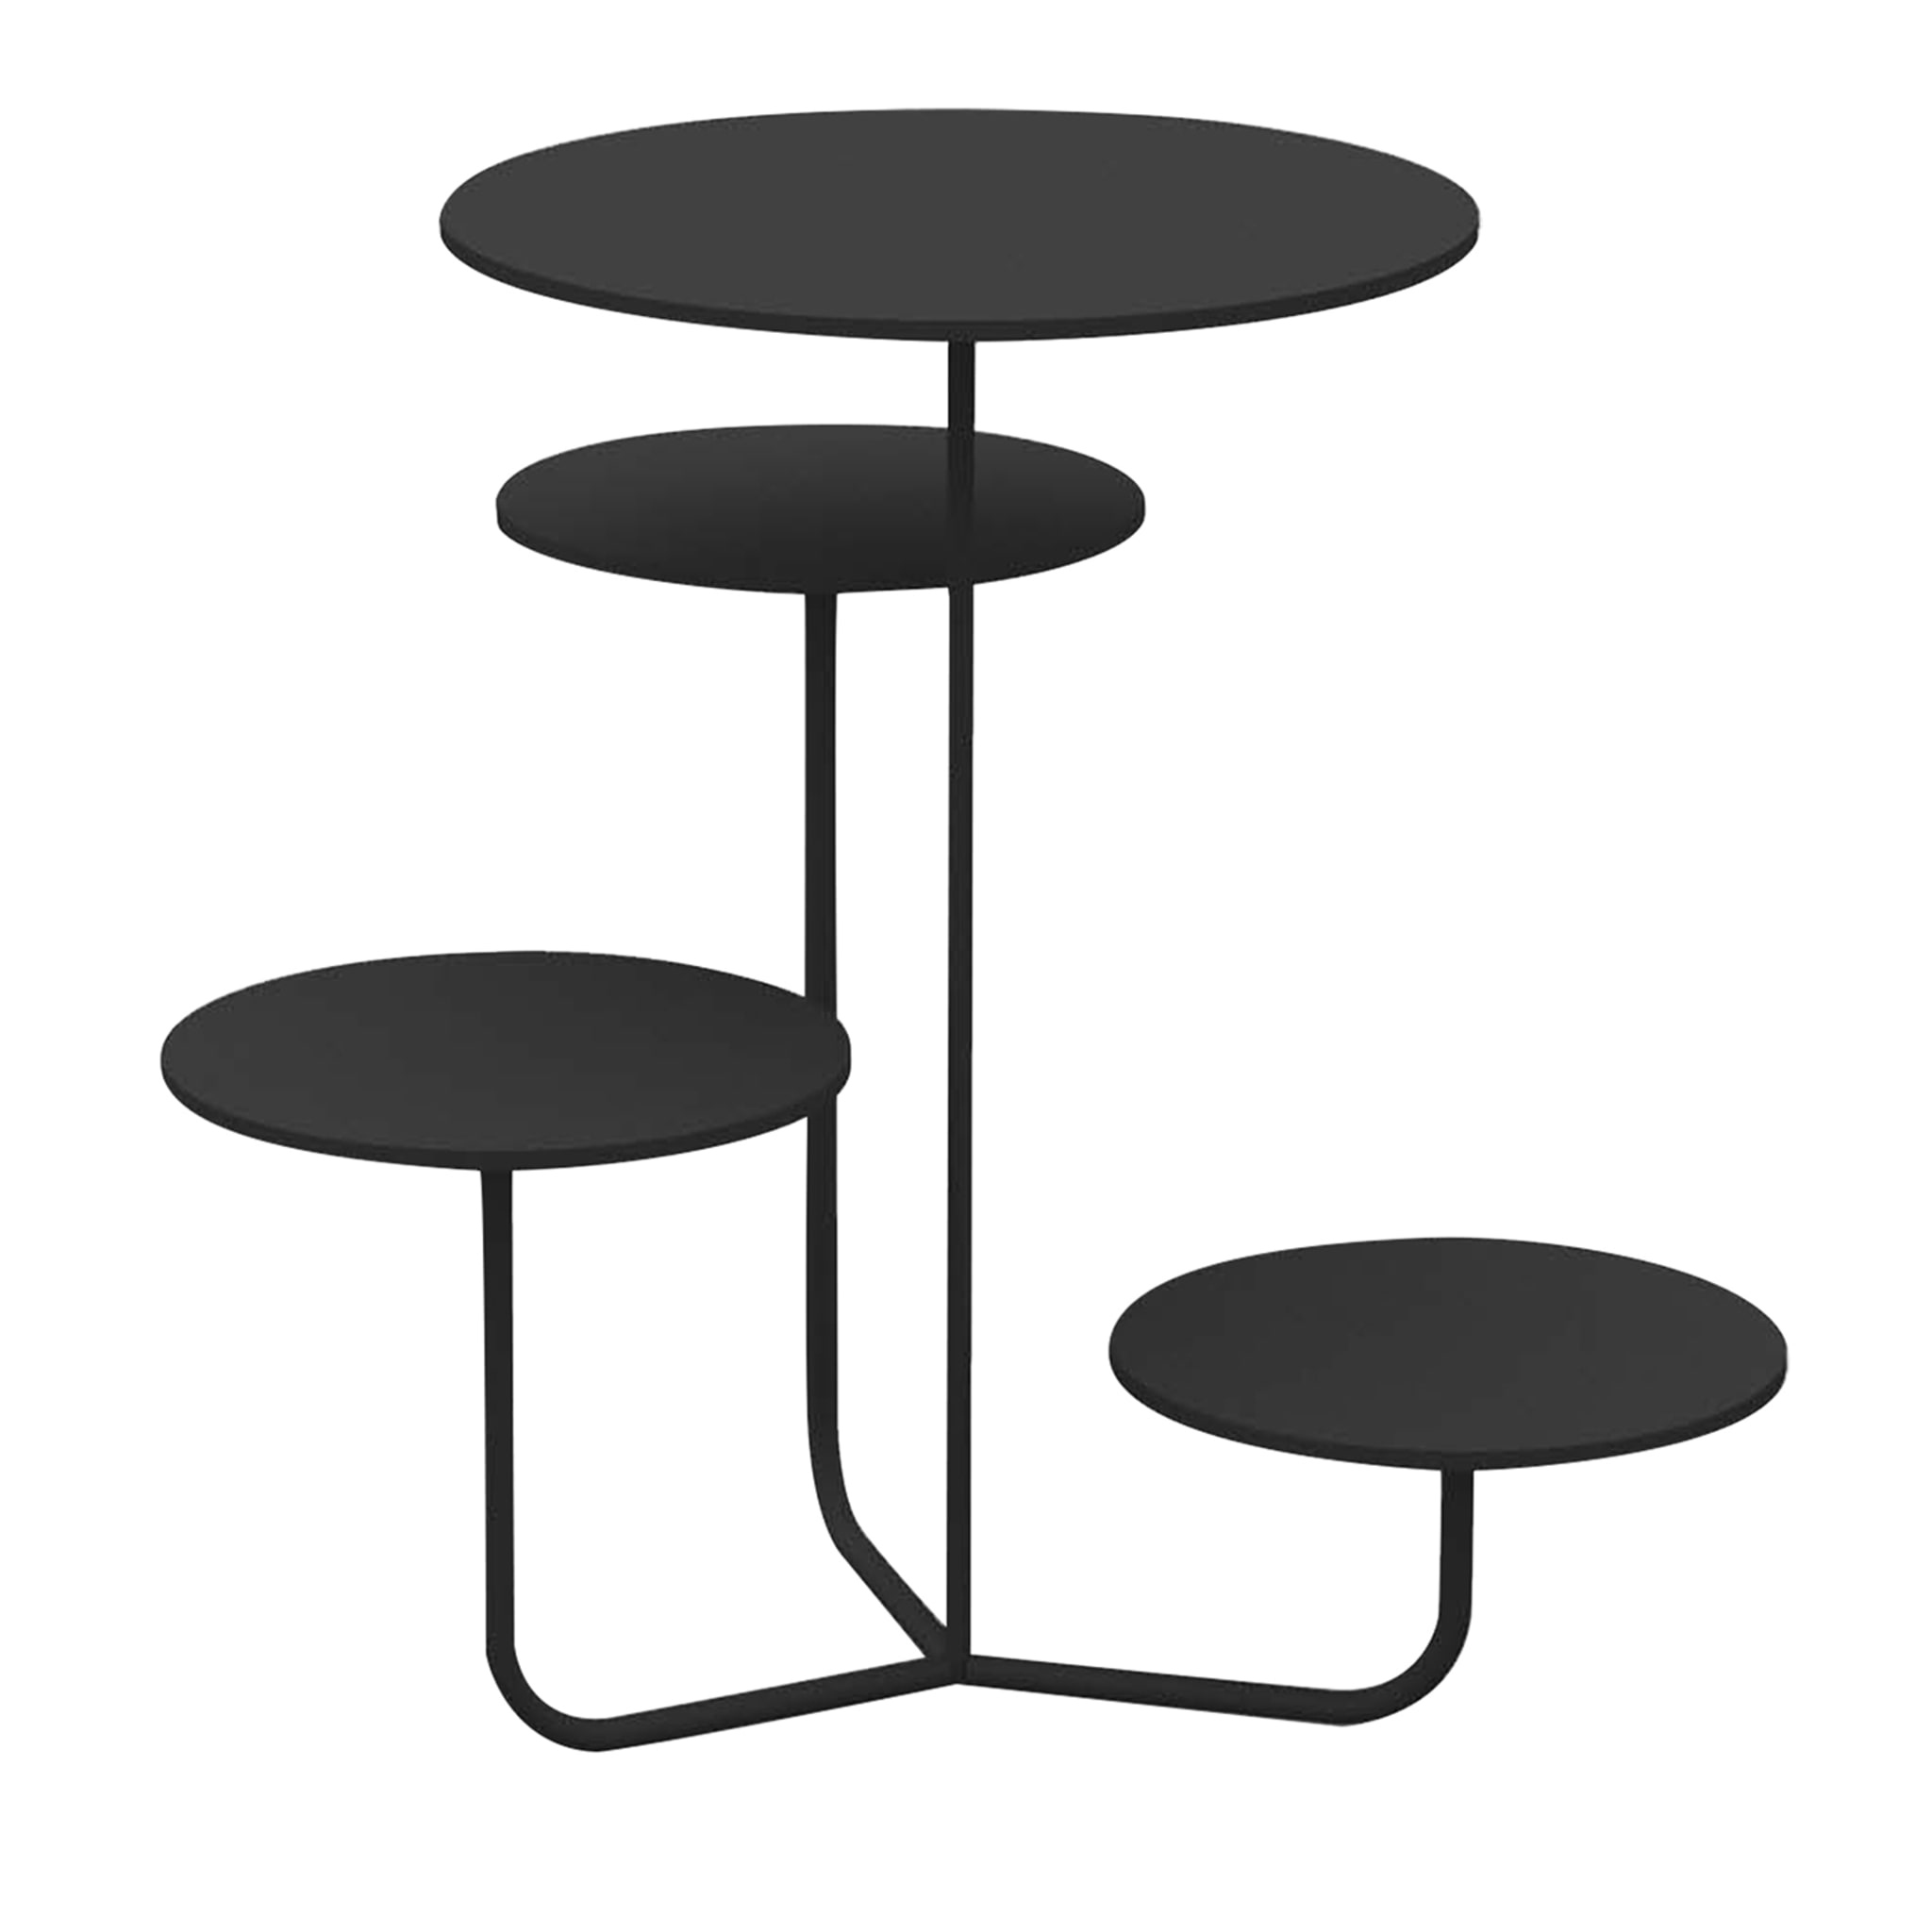 Condiviso 4-Tier Anthracite Serving Stand - Main view